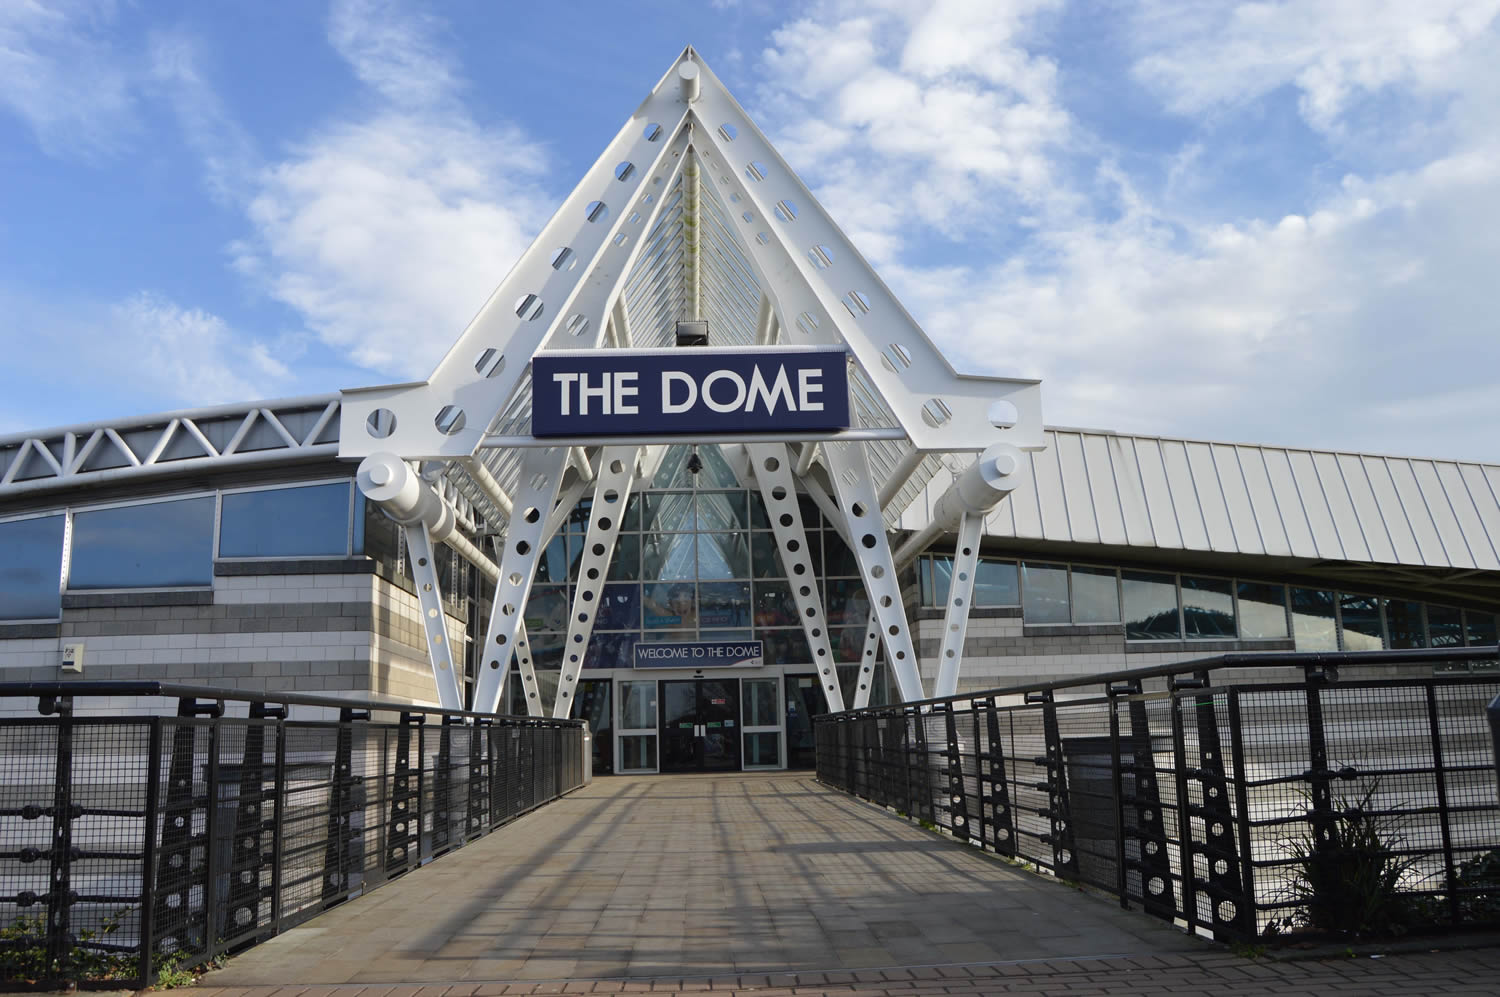 Image name Doncaster Dome the 24 image from the post Major Refurbishment for Doncaster's Premier Leisure Destination: The Dome in Yorkshire.com.